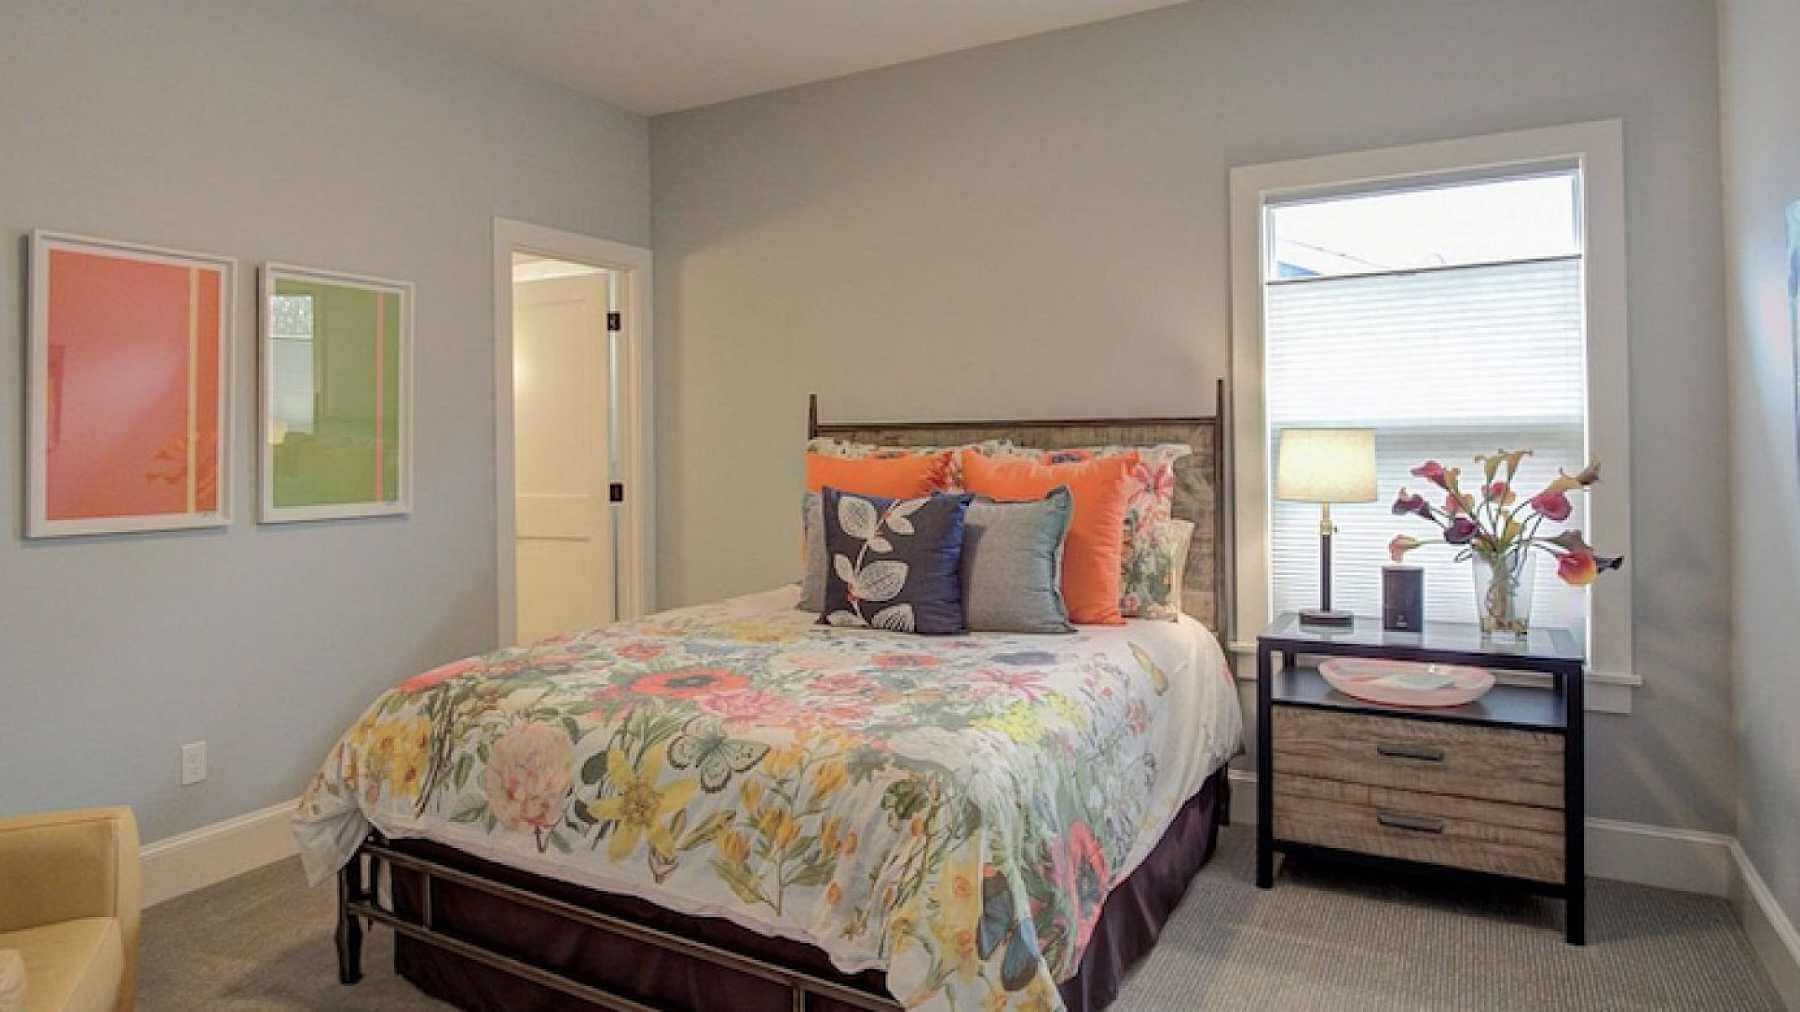 Bedroom Walls In Sherwin Williams Agreeable Gray